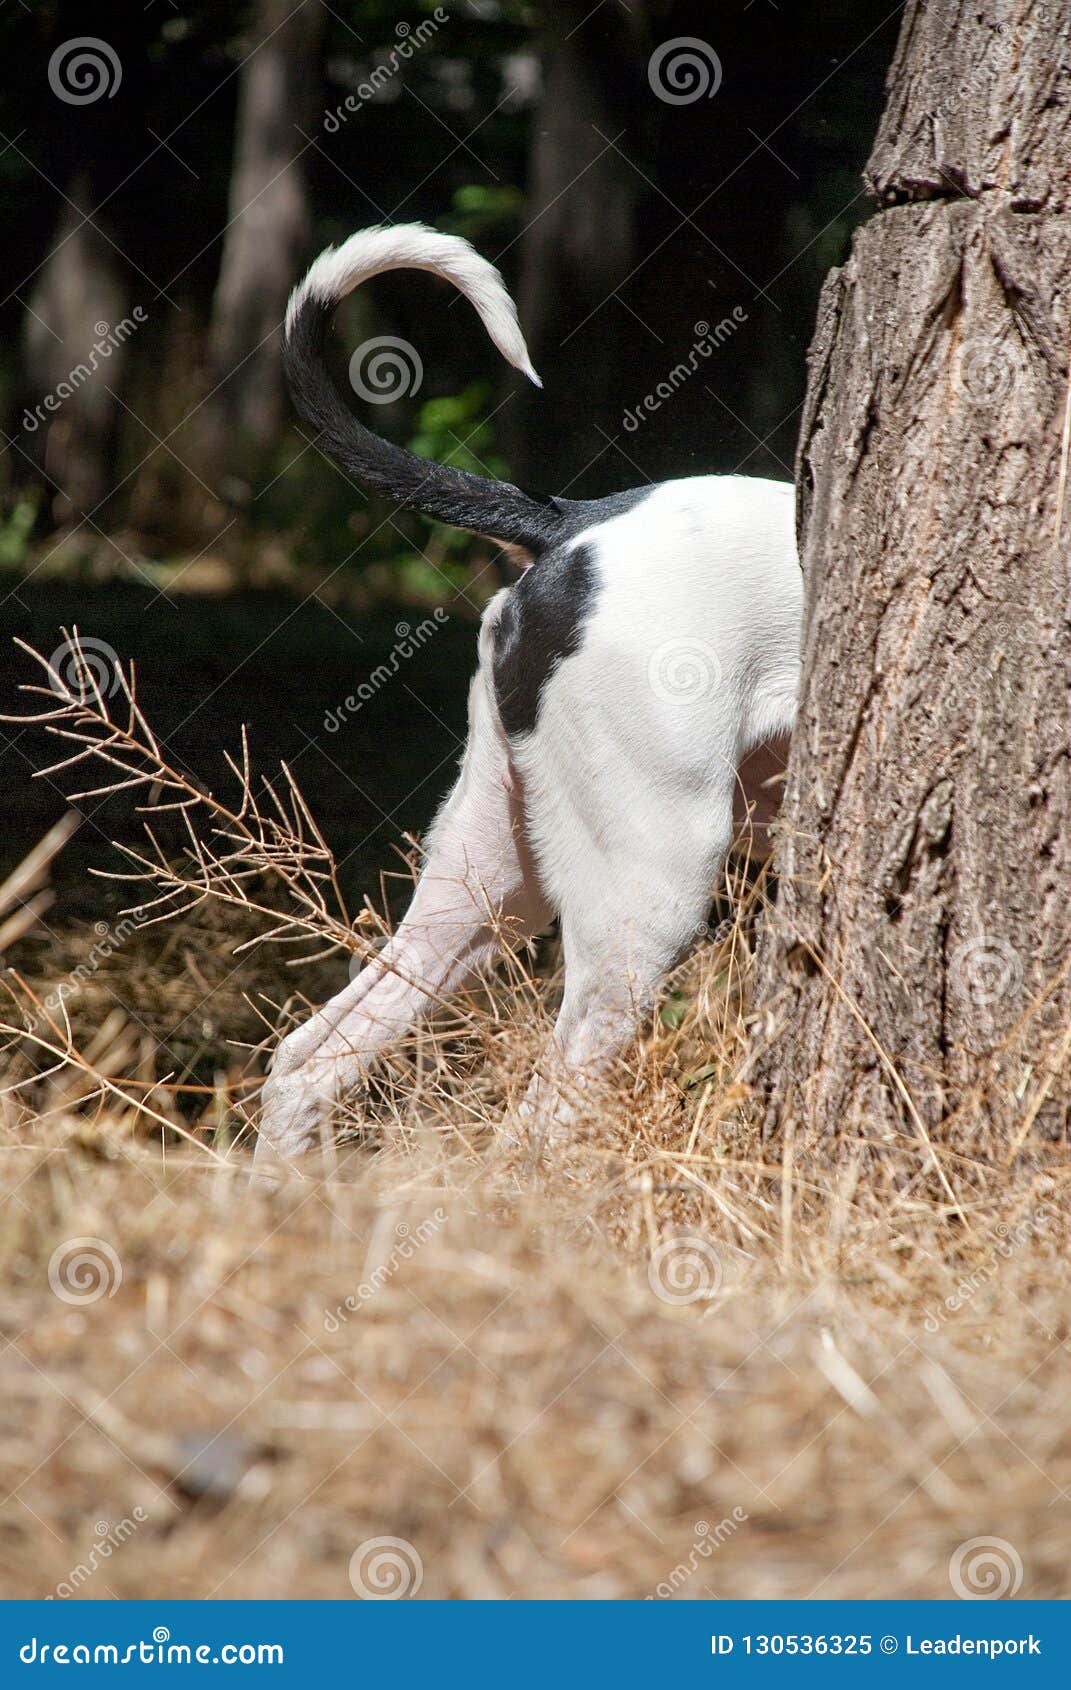 dogo hid behind a tree, tail peeps